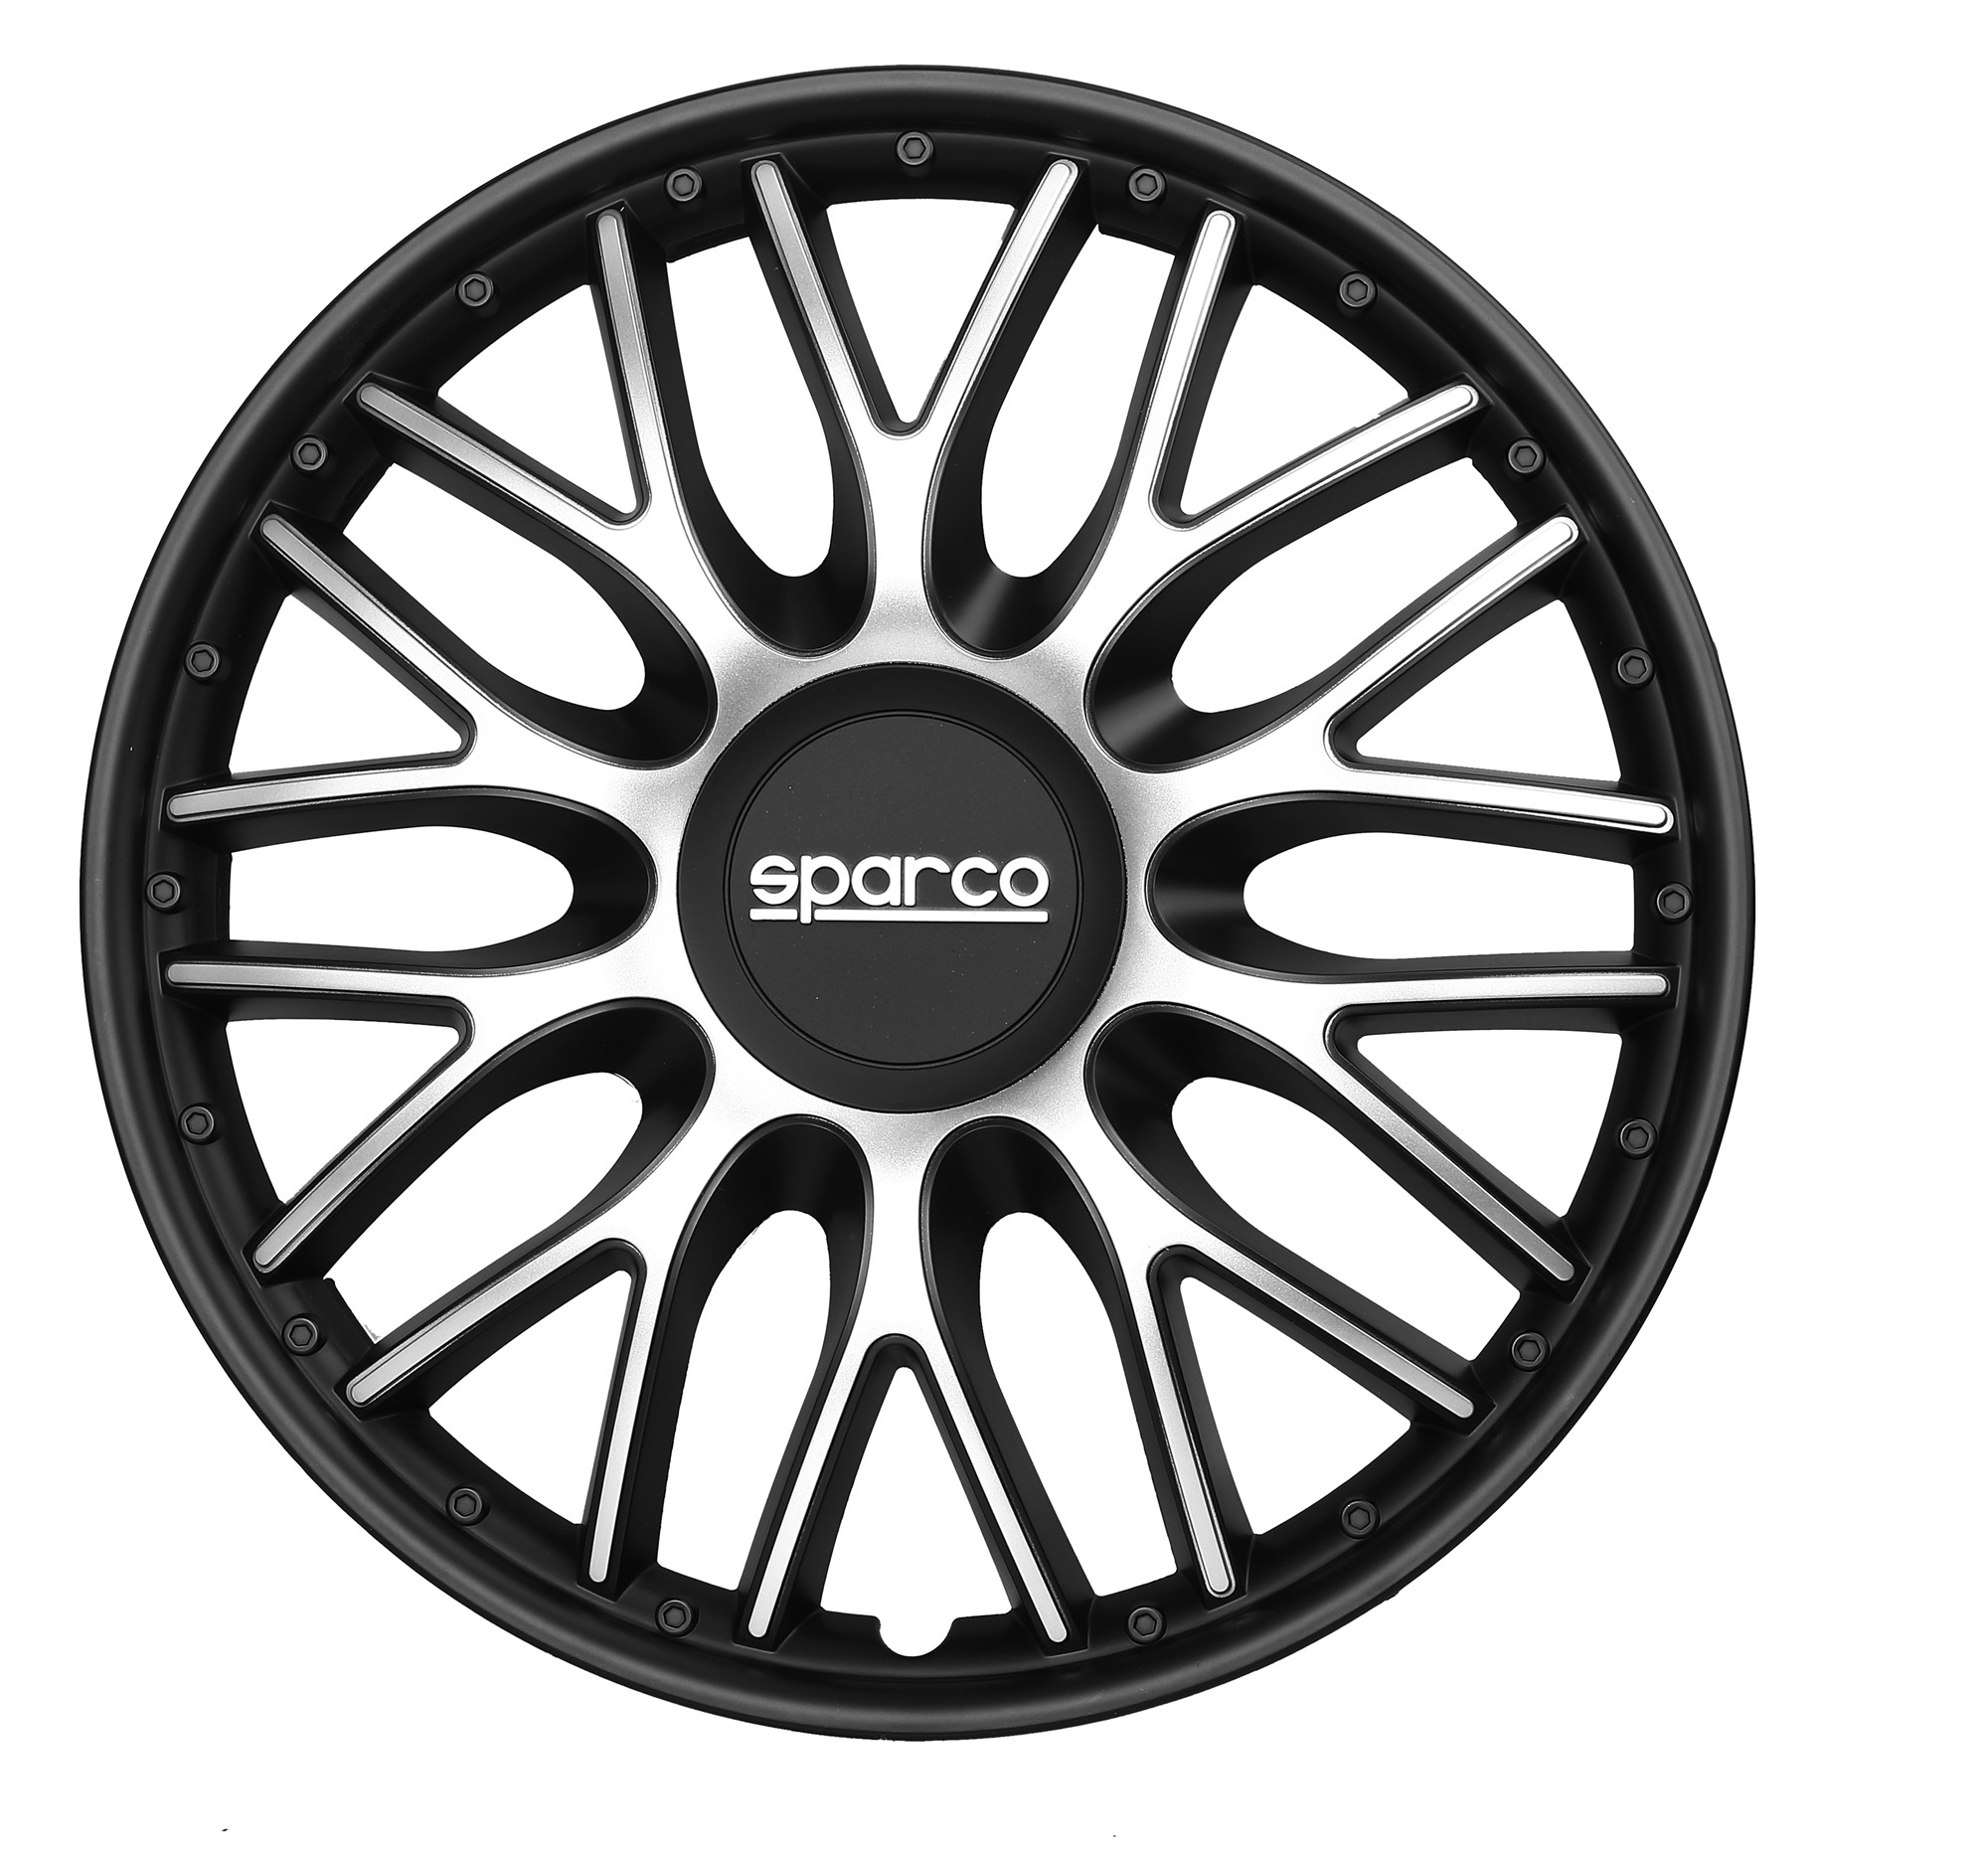 Wheel covers Roma 14 silver-black 4pcs Sparco